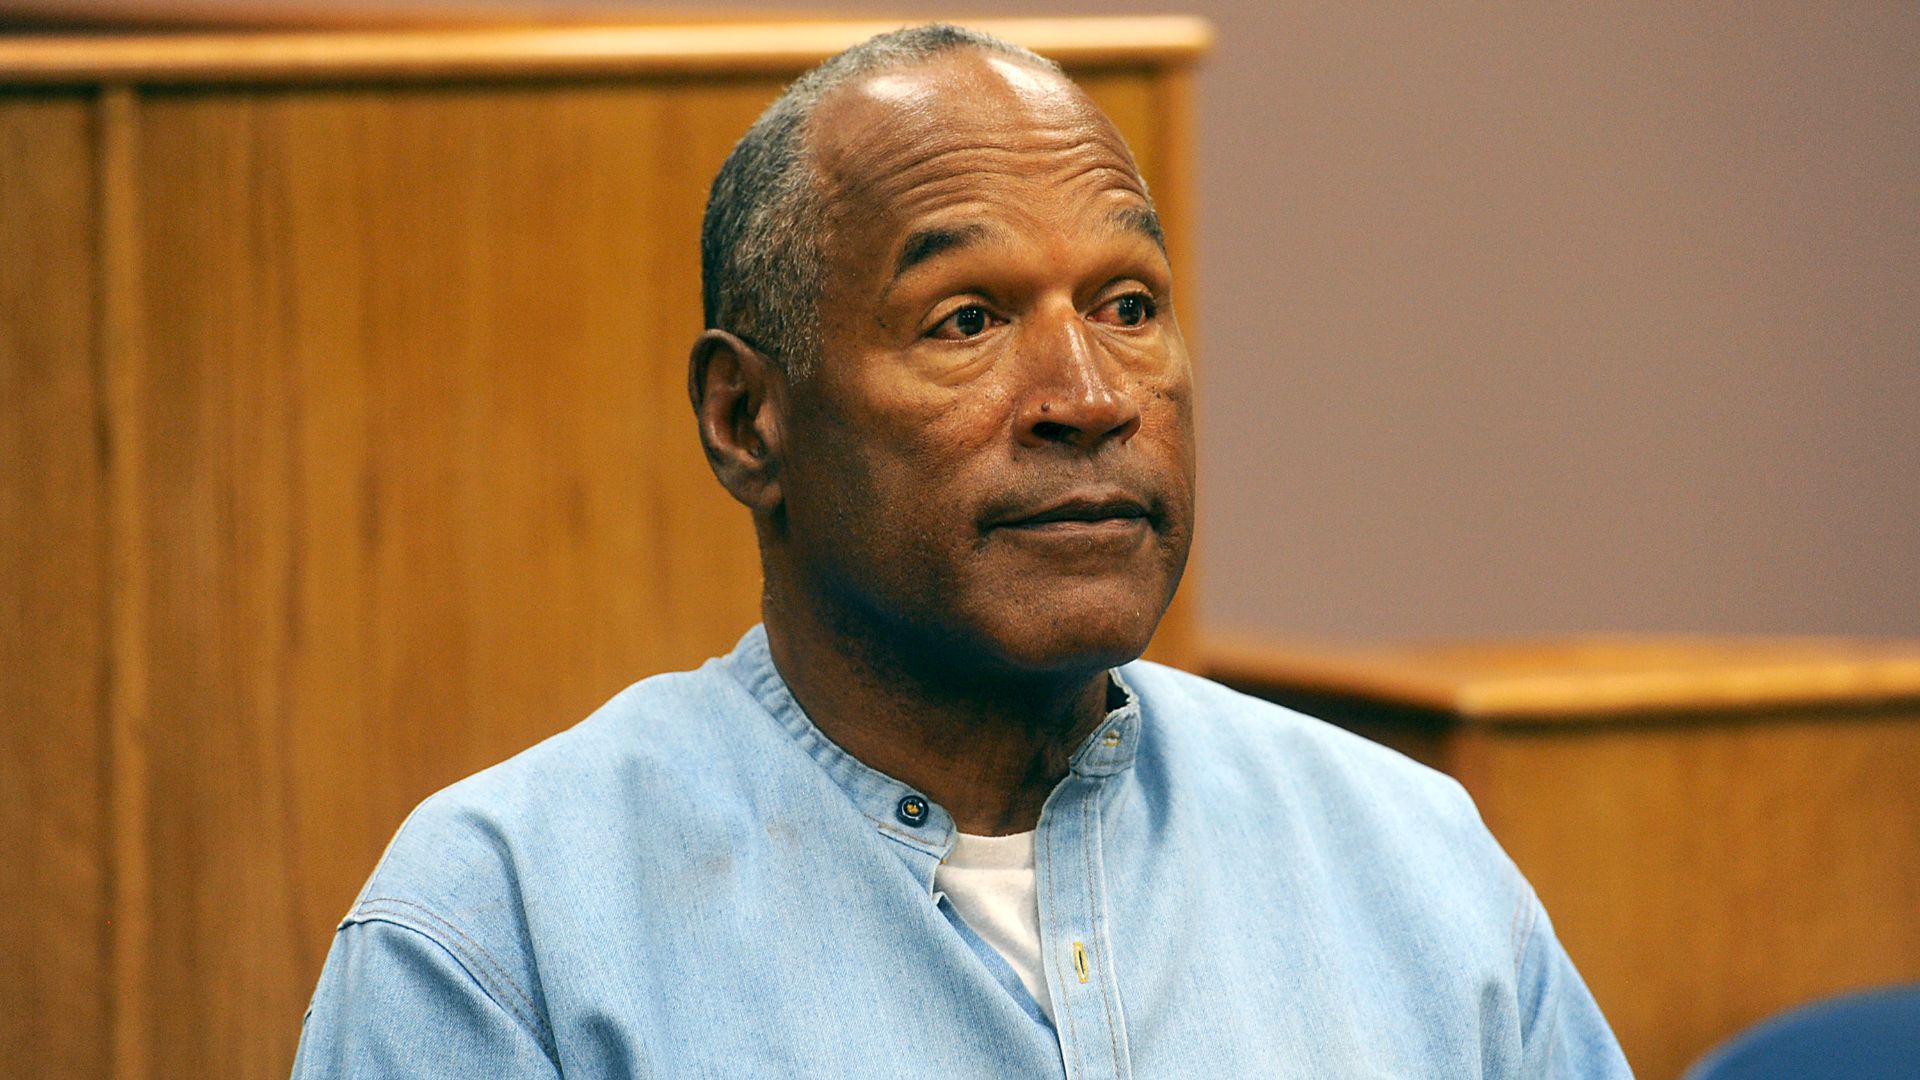 O.J. Simpson has died after a battle with cancer, reports TMZ. The former NFL player, accused of the double murder of his ex-wife, Nicole Brown Simpson, and her friend Ron Goldman, in the 90s, before being acquitted, died in Las Vegas, according to his family. The man whose trial marked the 90s and who was finally found guilty of the double murder, this time in civil court, in 1997, was 76 years old.